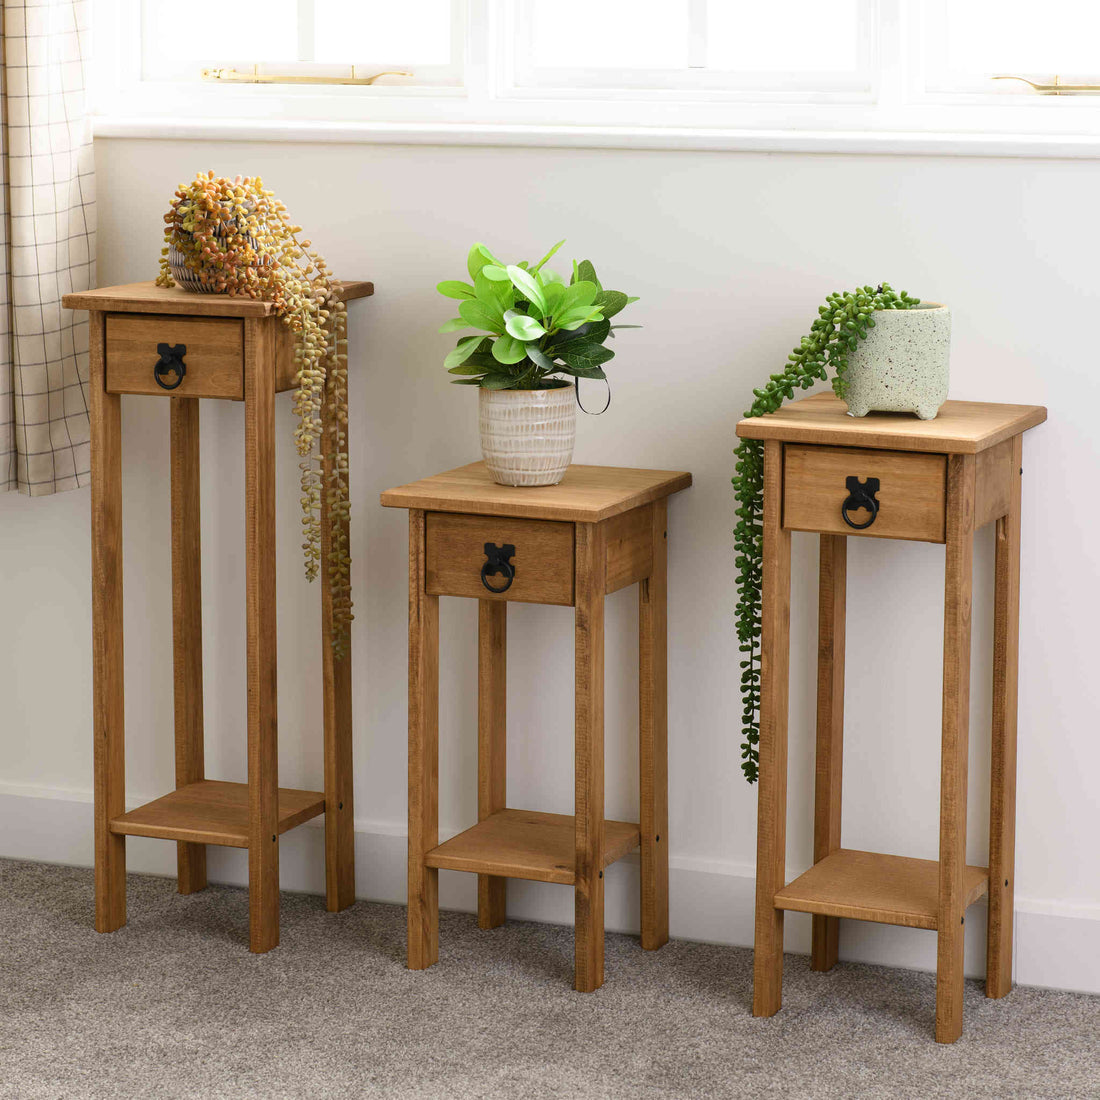 Corona Plant Stands (Distressed Waxed Pine) | Set of 3